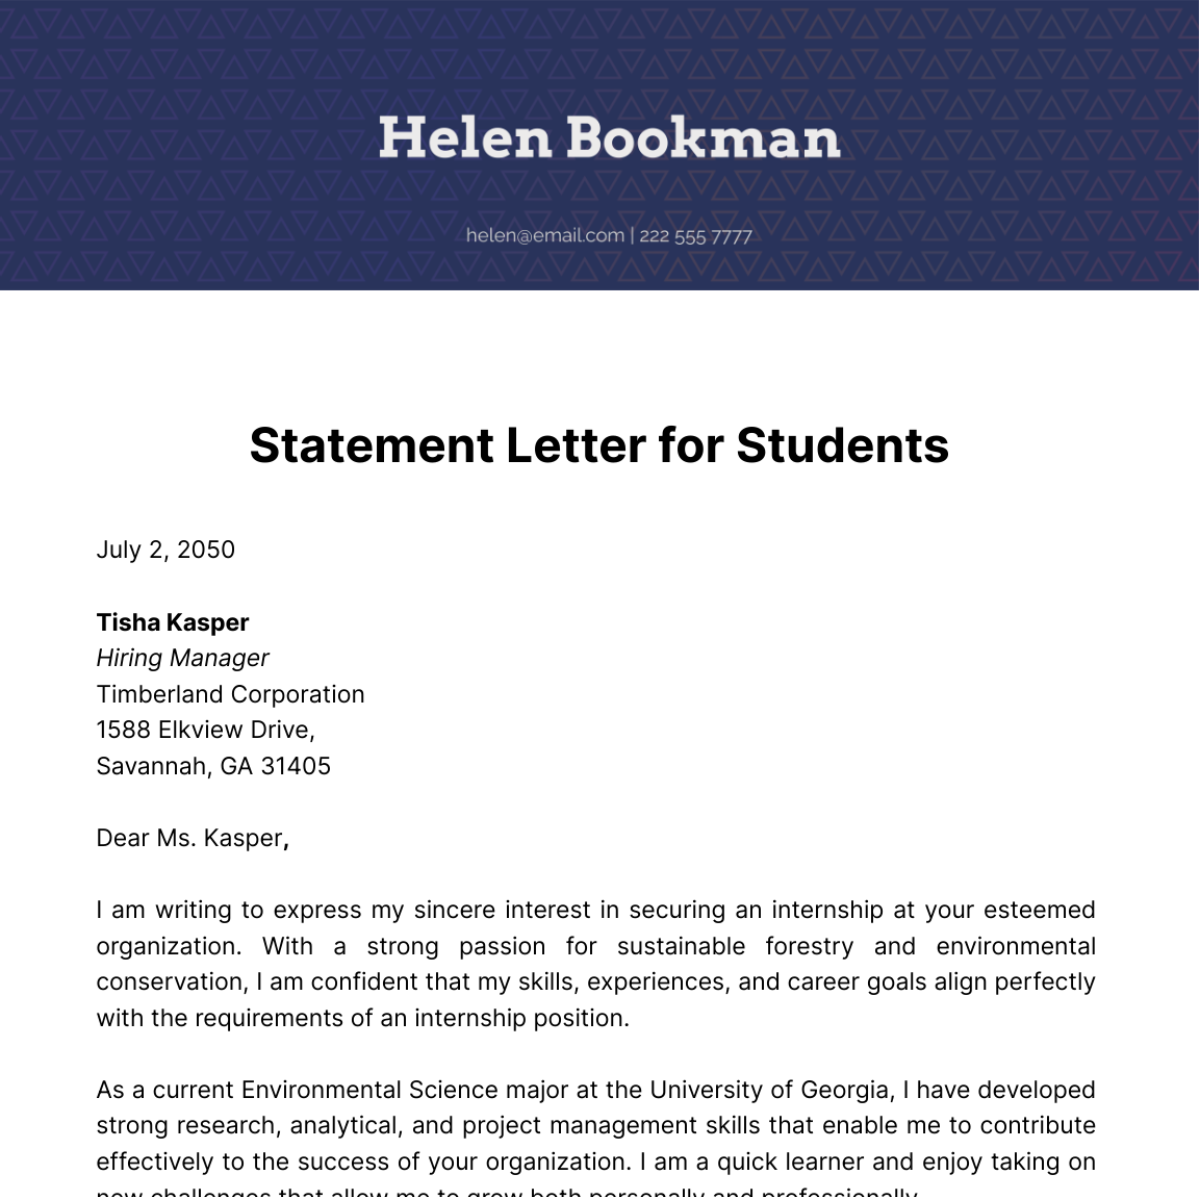 Statement Letter for Students Template